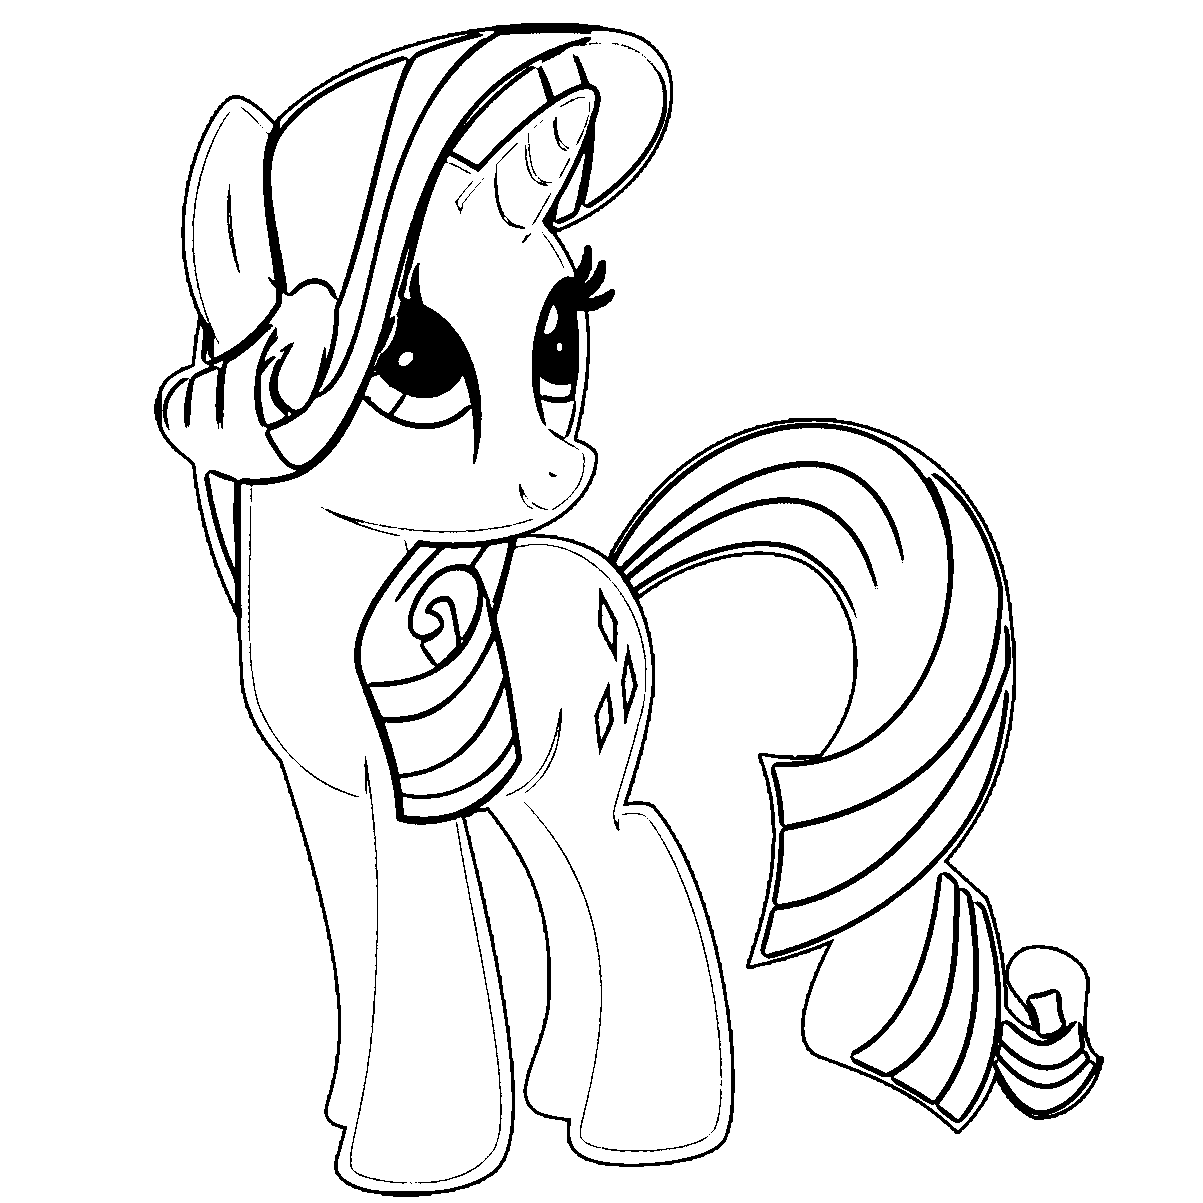 Free Coloring Page For My Little Pony Rarity, Download Free Clip Art